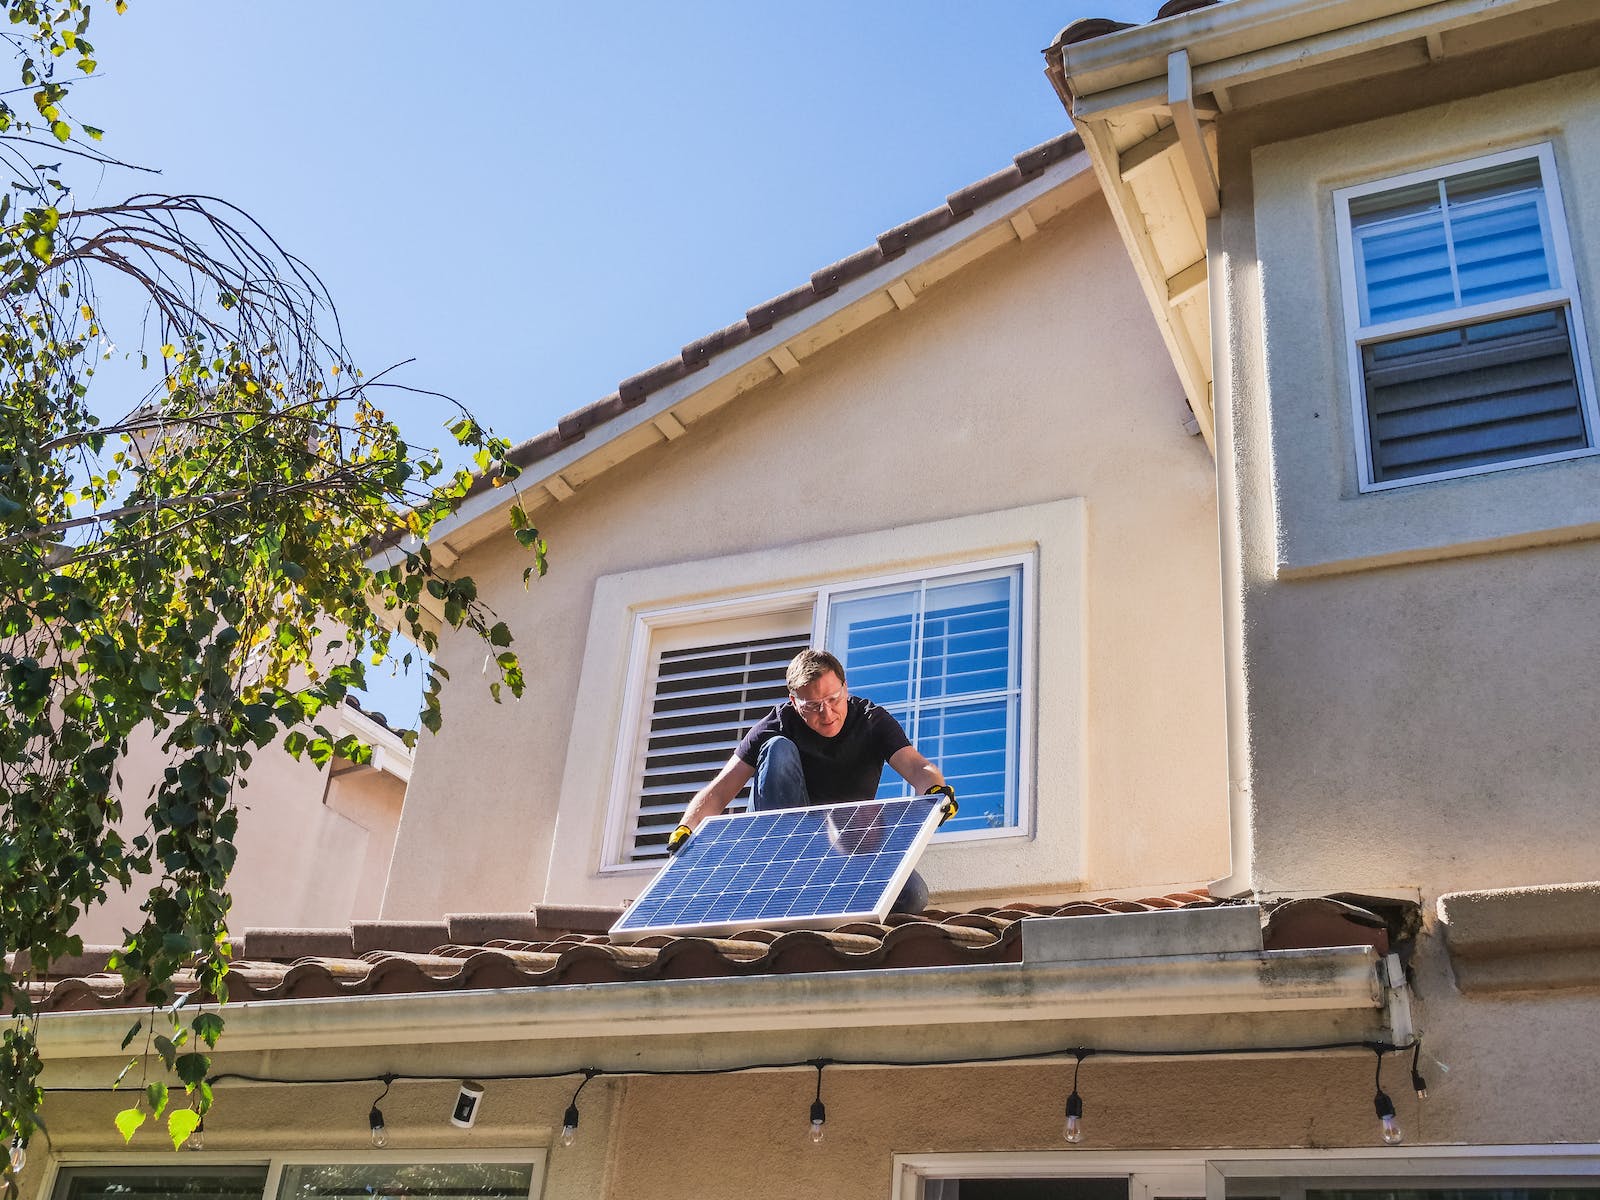 A Man Inspecting a Photovoltaic Panel on the Roof